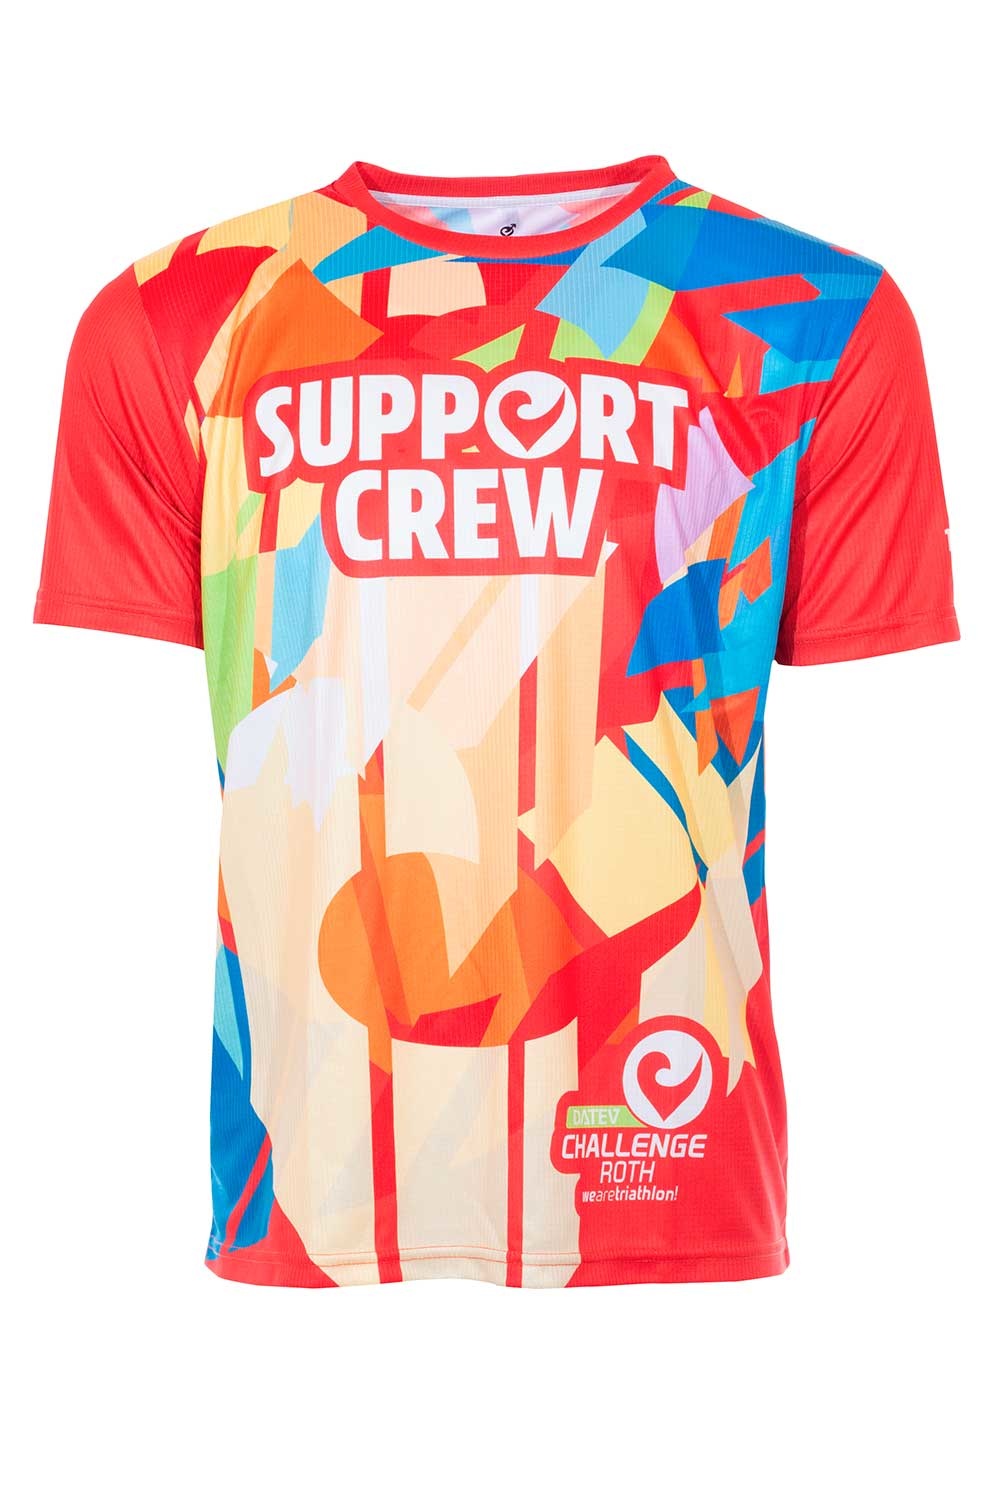 Support Crew - Functional Shirt 